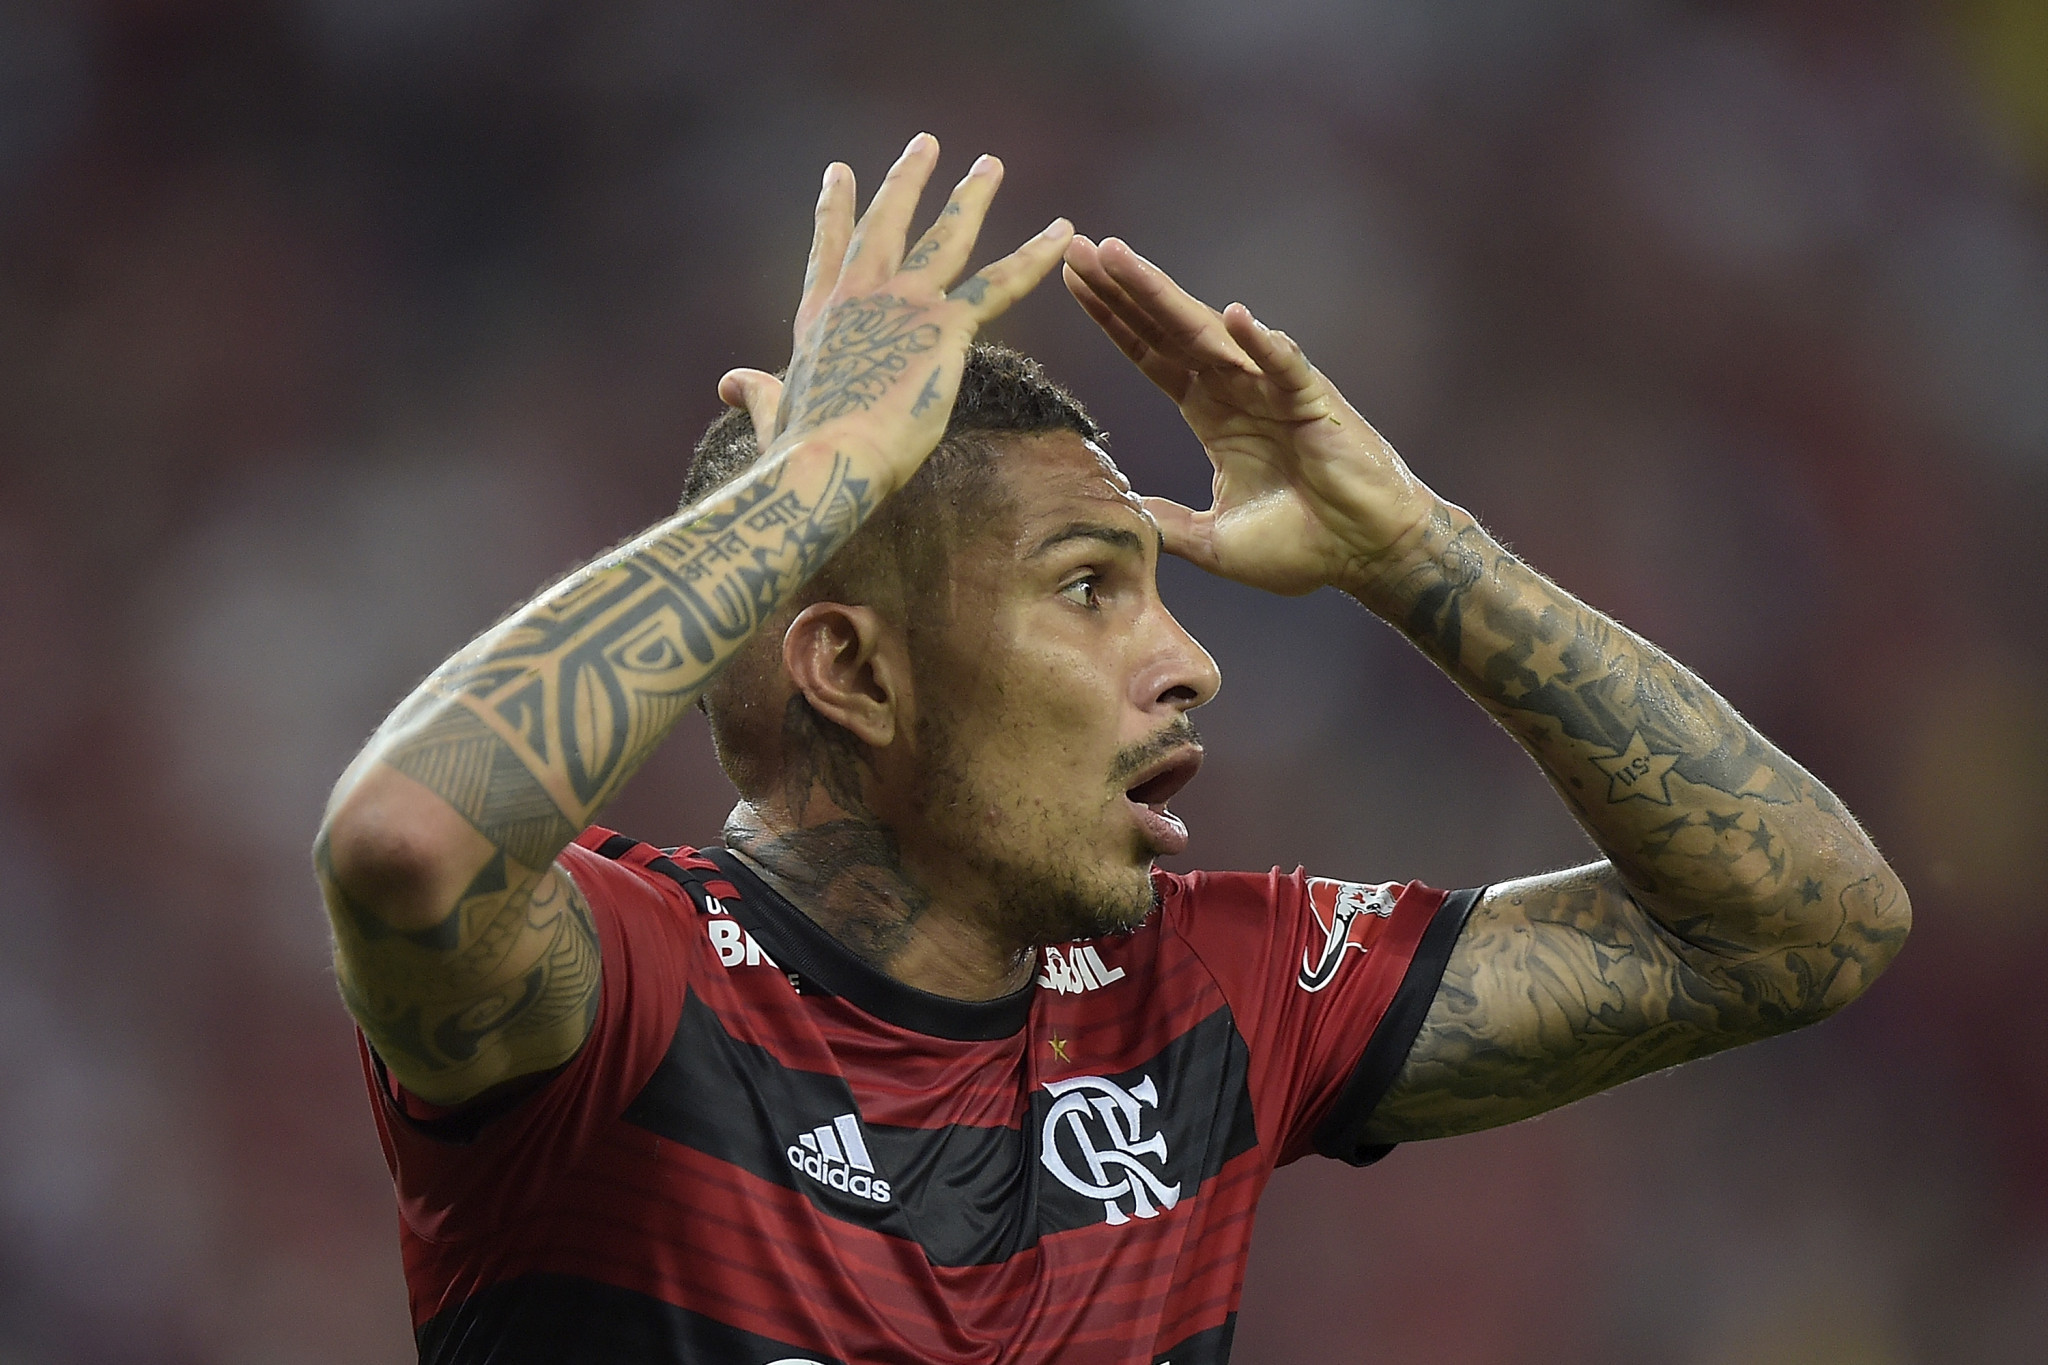 Paolo Guerrero has had his latest appeal against a drugs ban rejected, meaning he will not play until April 2019 ©Getty Images